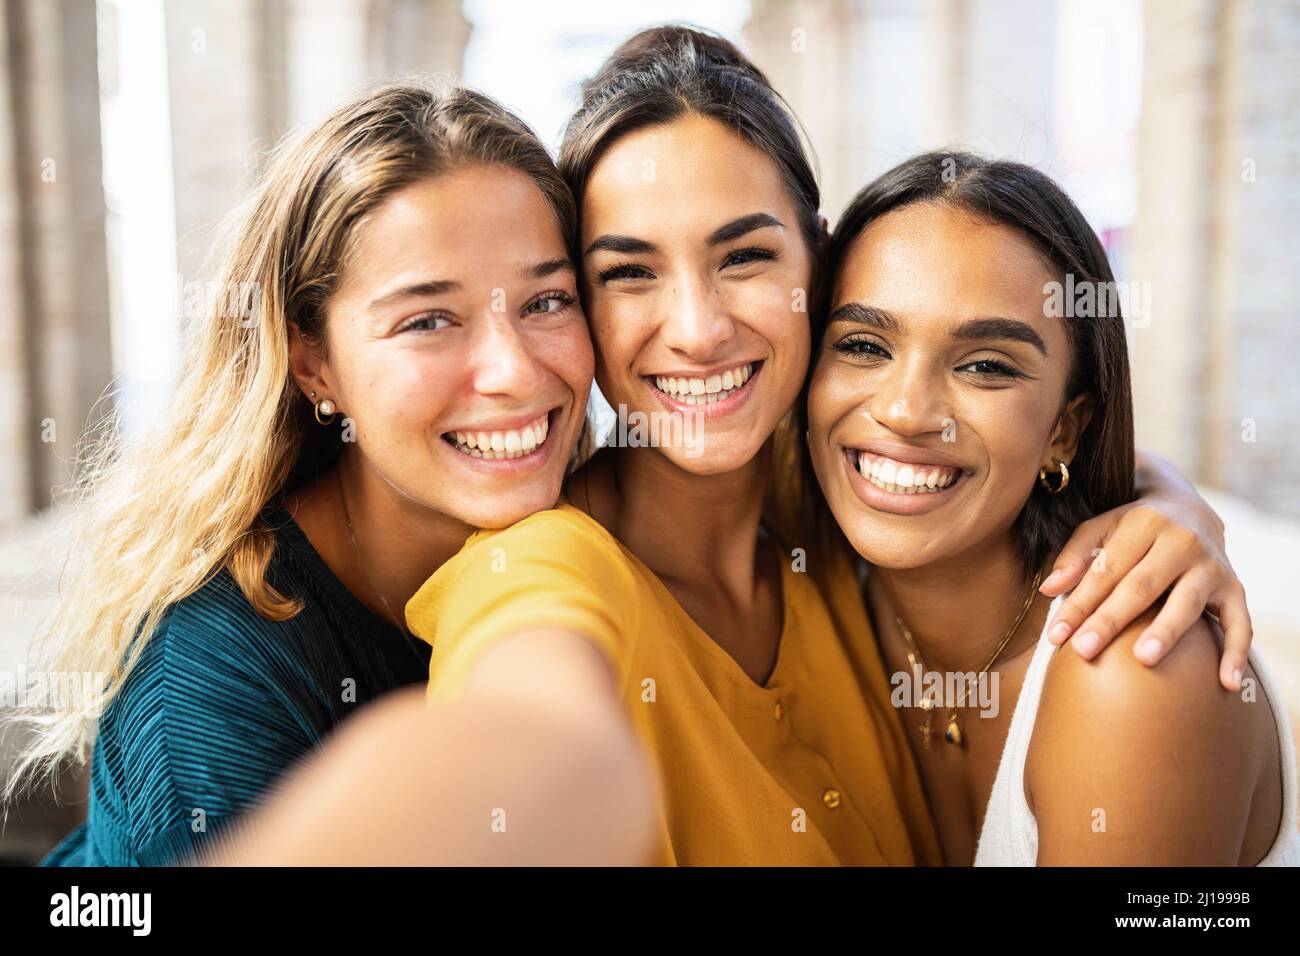 Three multi ethnic young female friends laughing together taking selfie outdoors Stock Photo